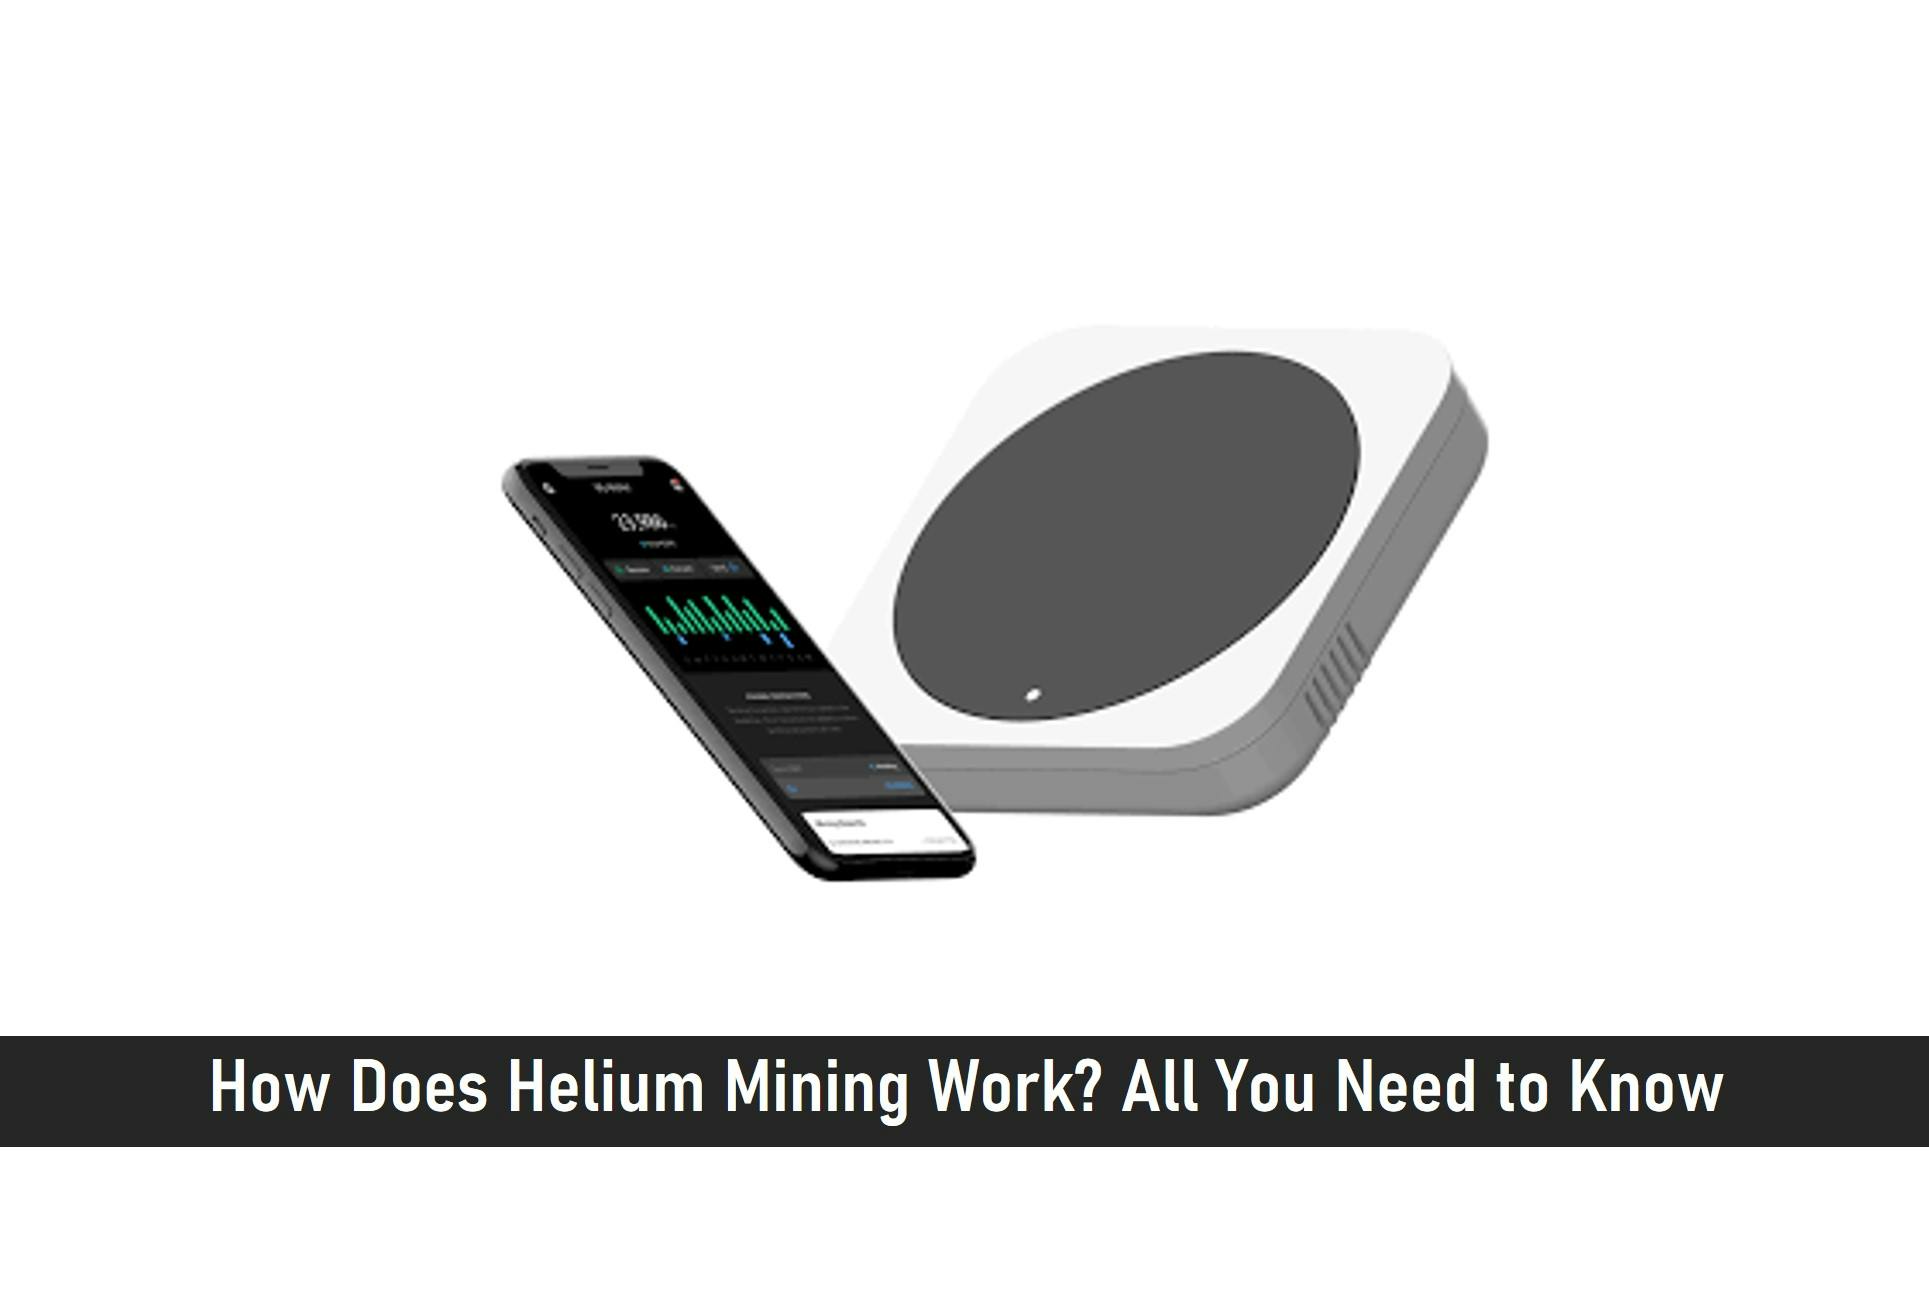 How Does Helium Mining Work? All You Need to Know